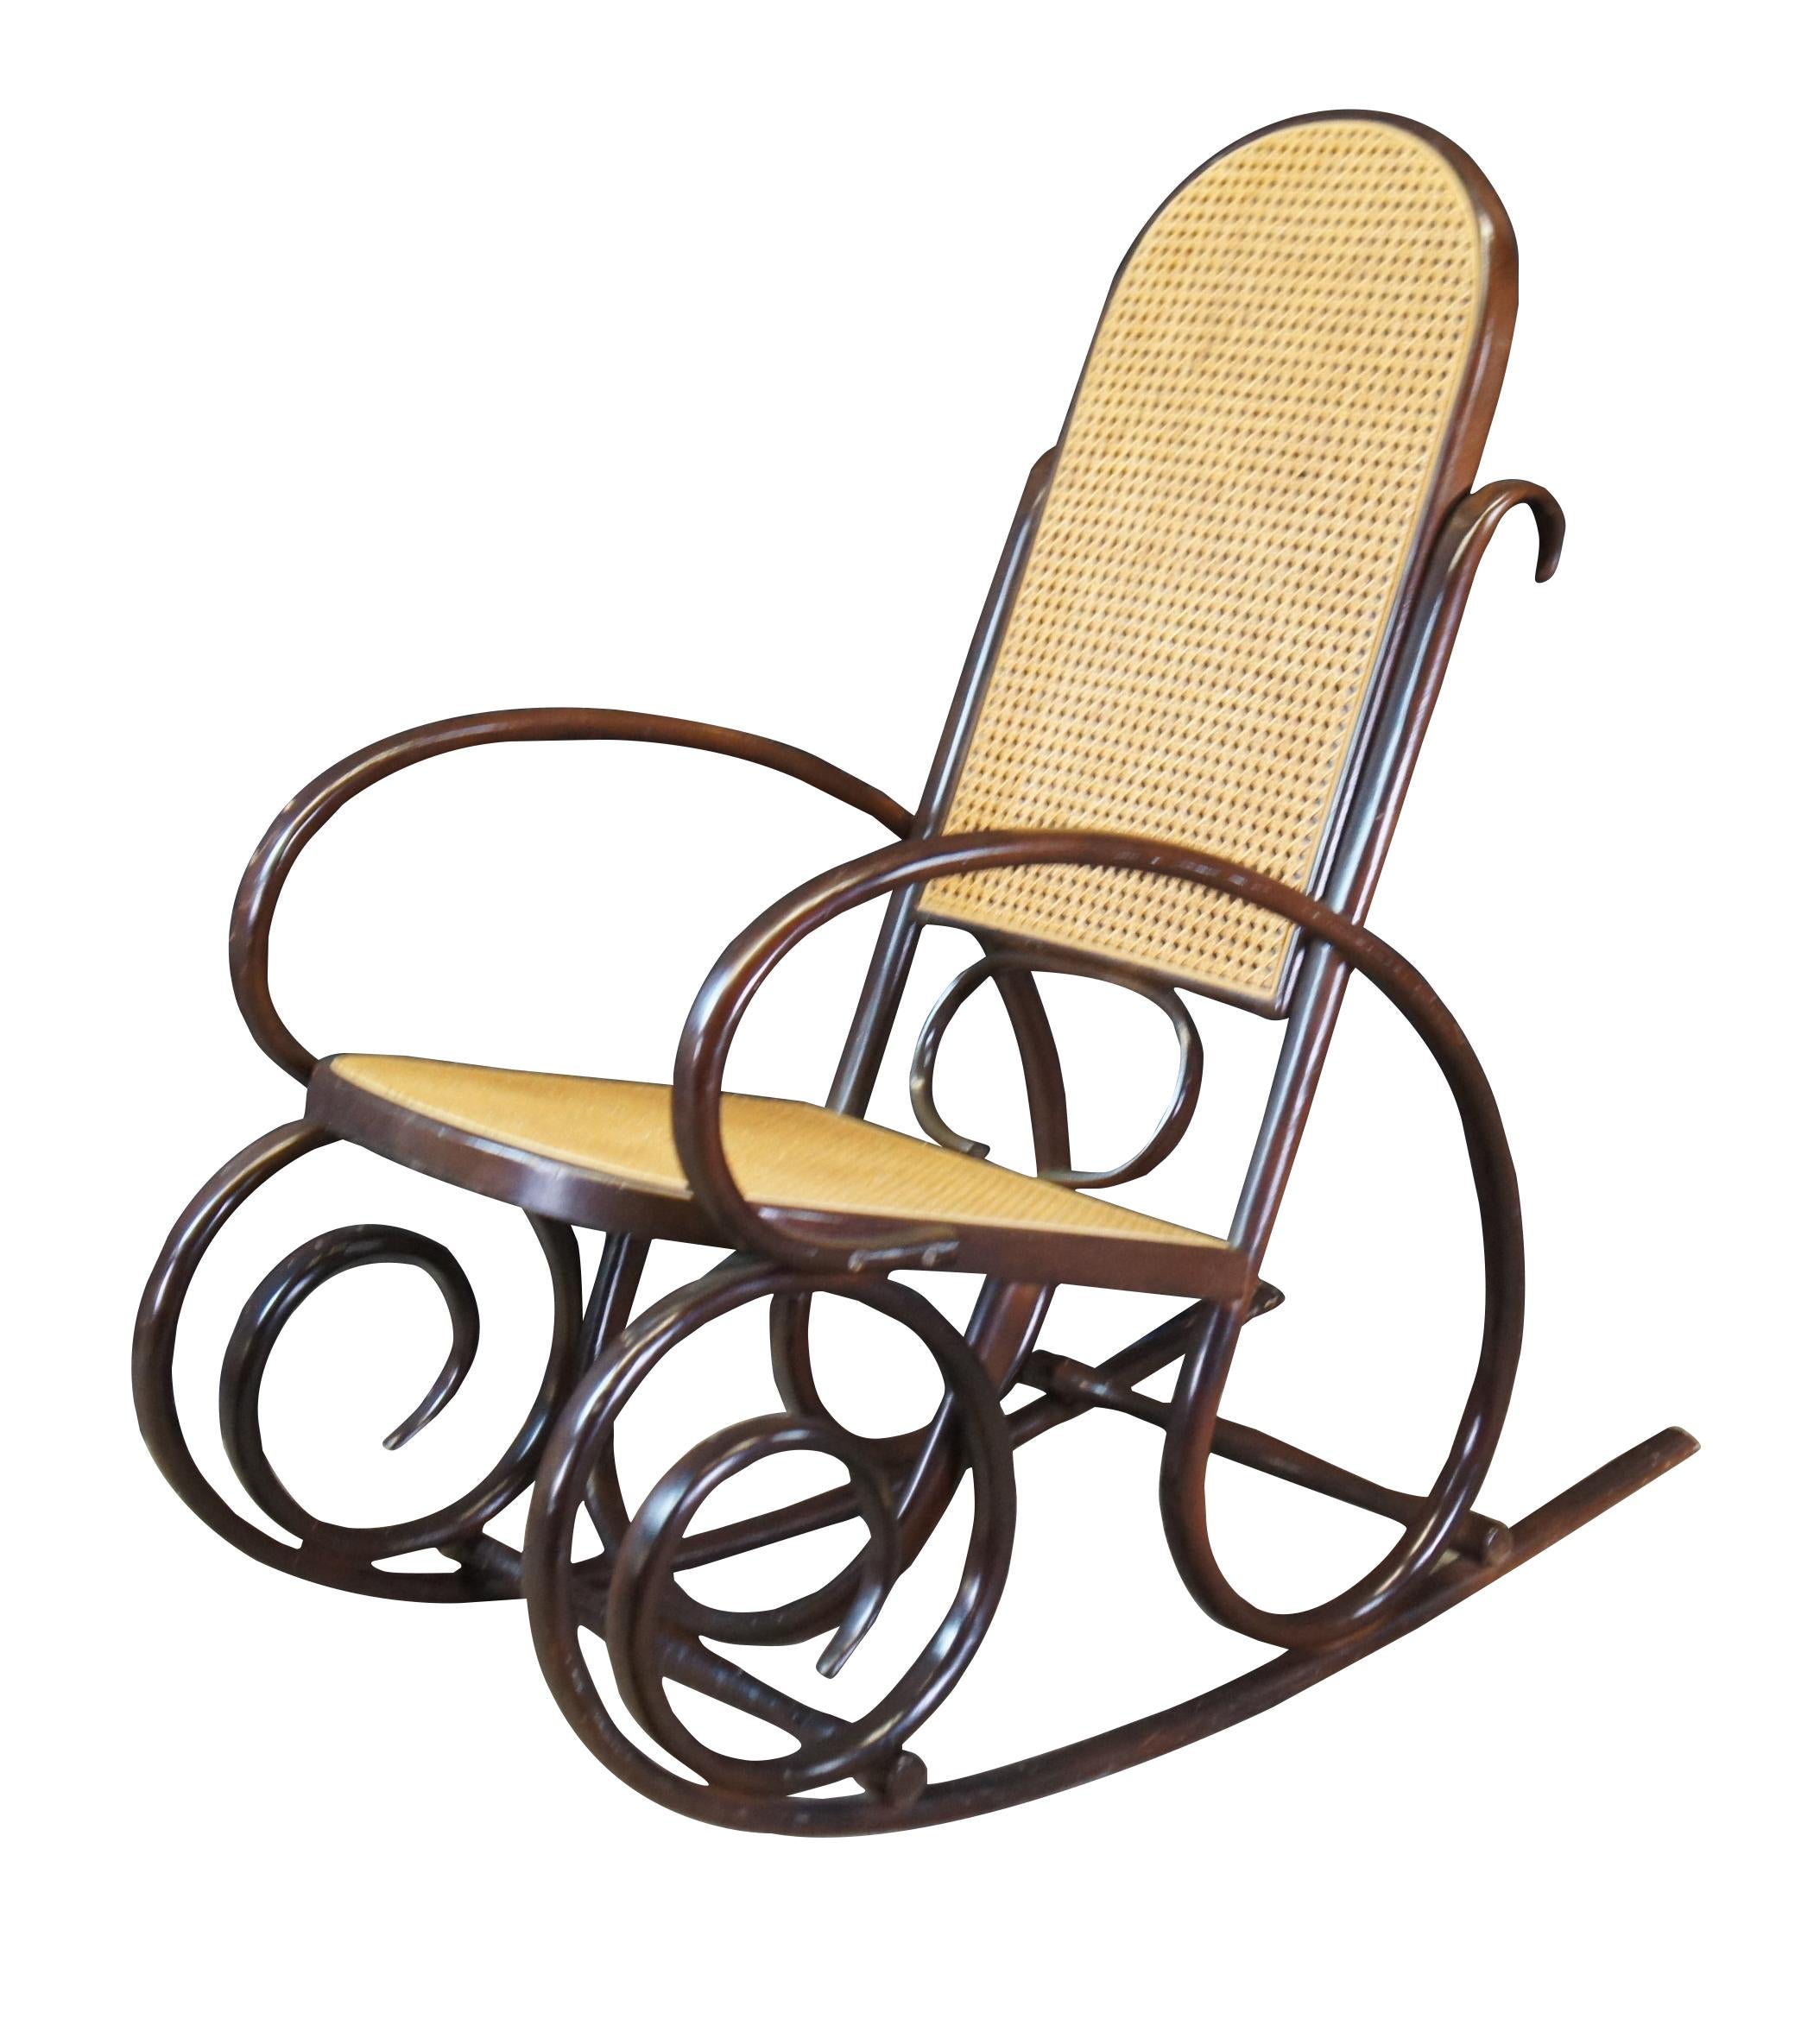 Thonet style attributed rocking chair. Circa mid century.  Made from hardwood in classic bentwood styling with rattan back and seat.  

Dimensions:
40